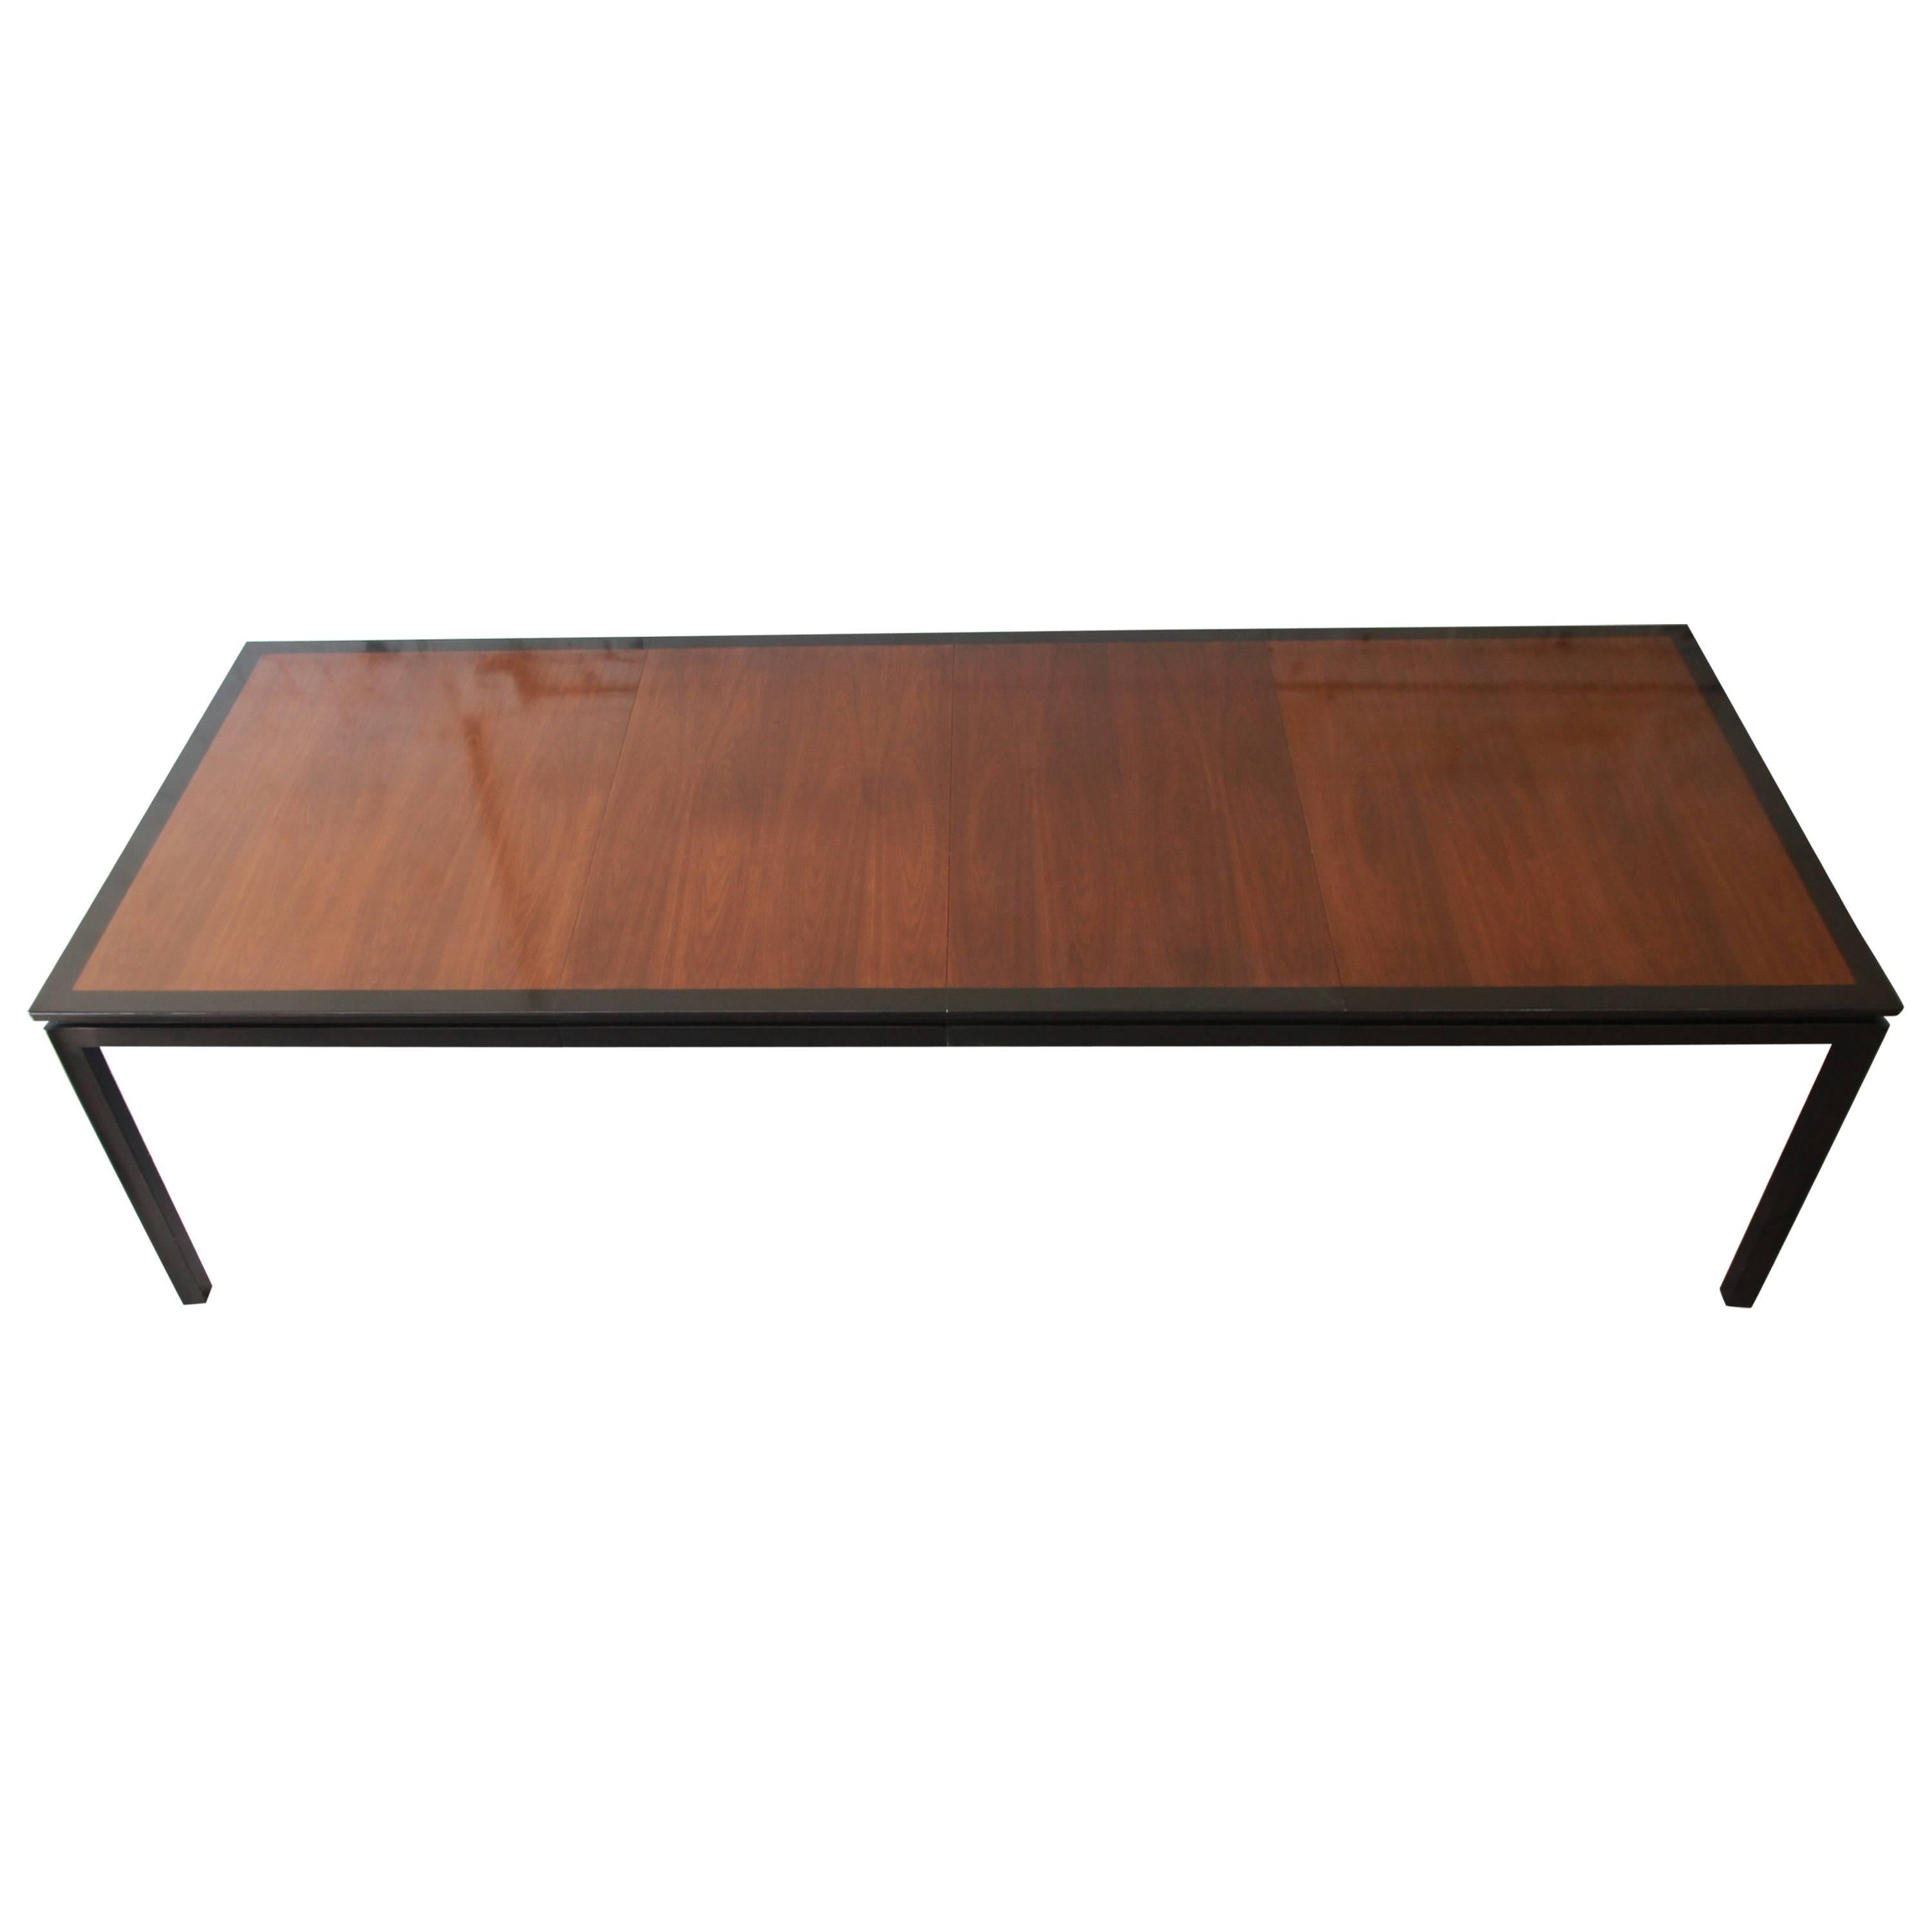 Edward Wormley for Dunbar Mid-Century Modern Extension Dining Table, 1950s